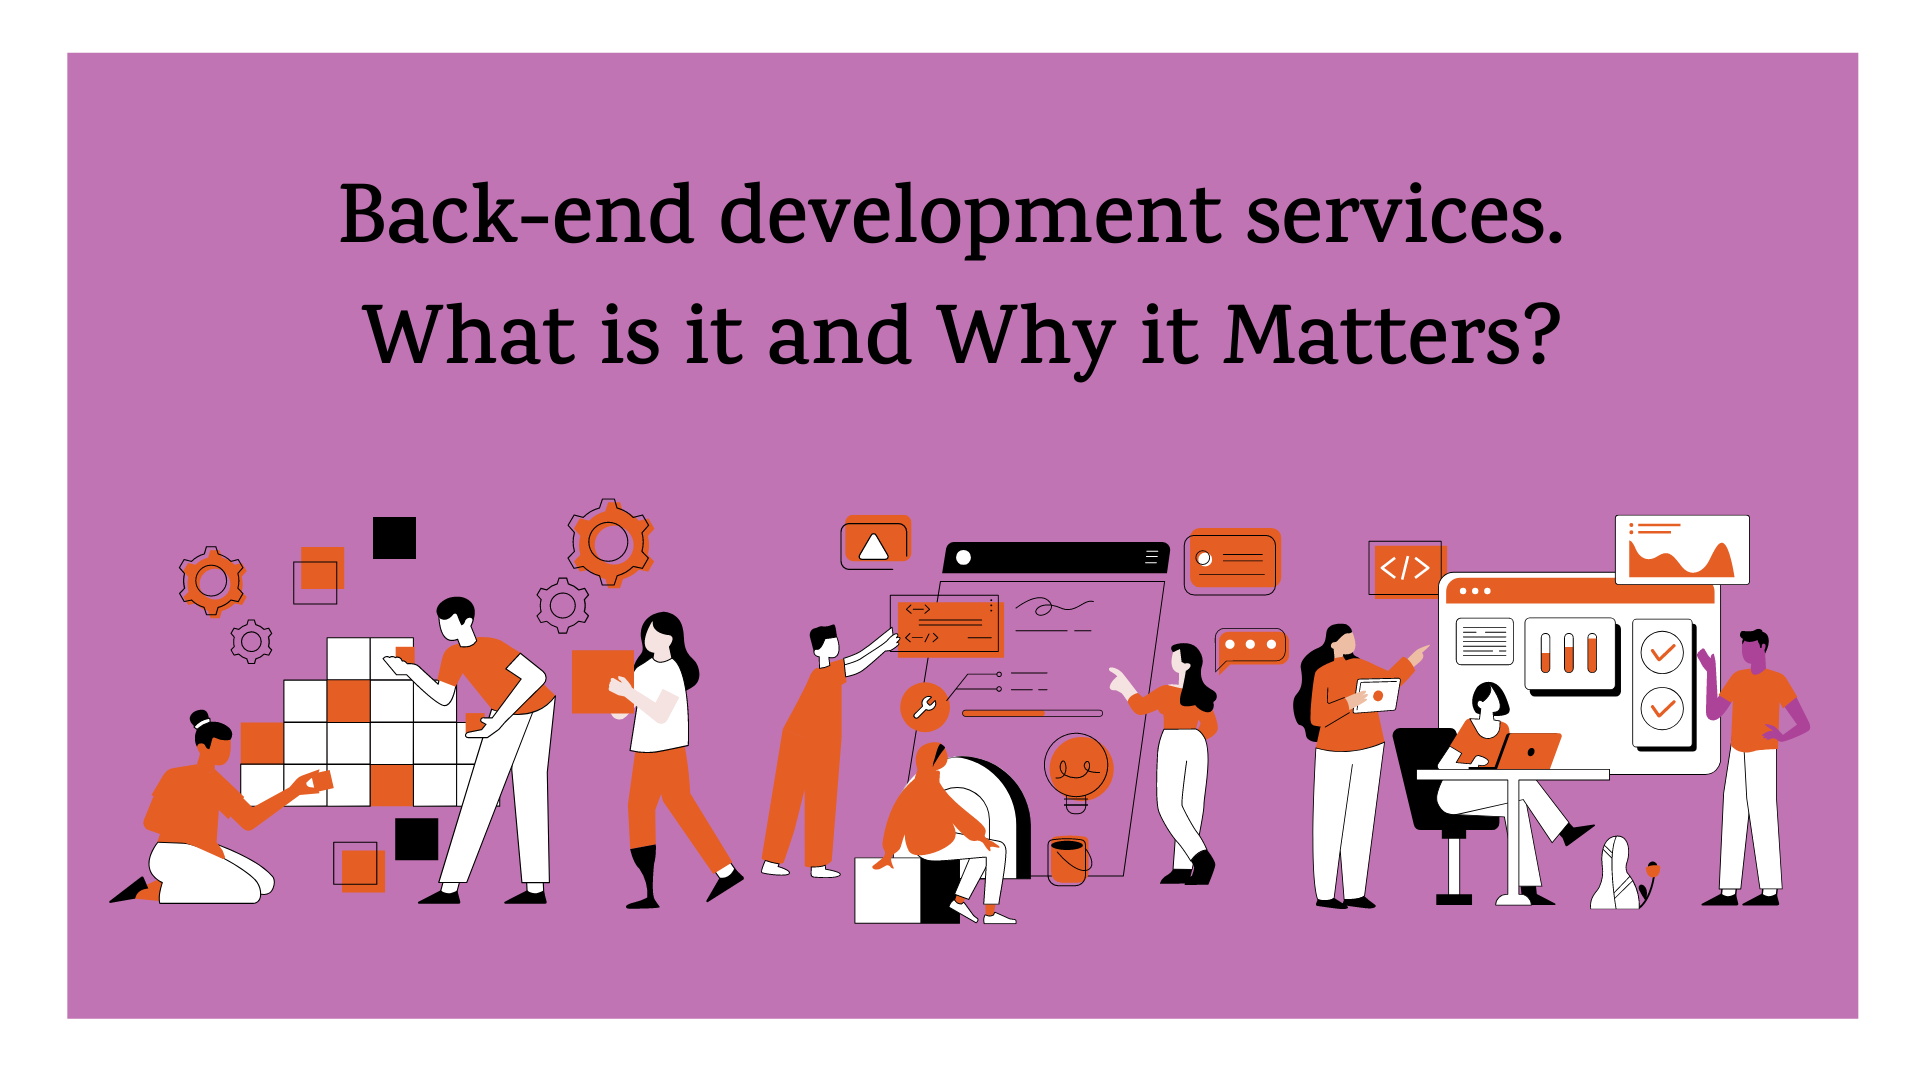 Back-end development services: What is it and Why it Matters?